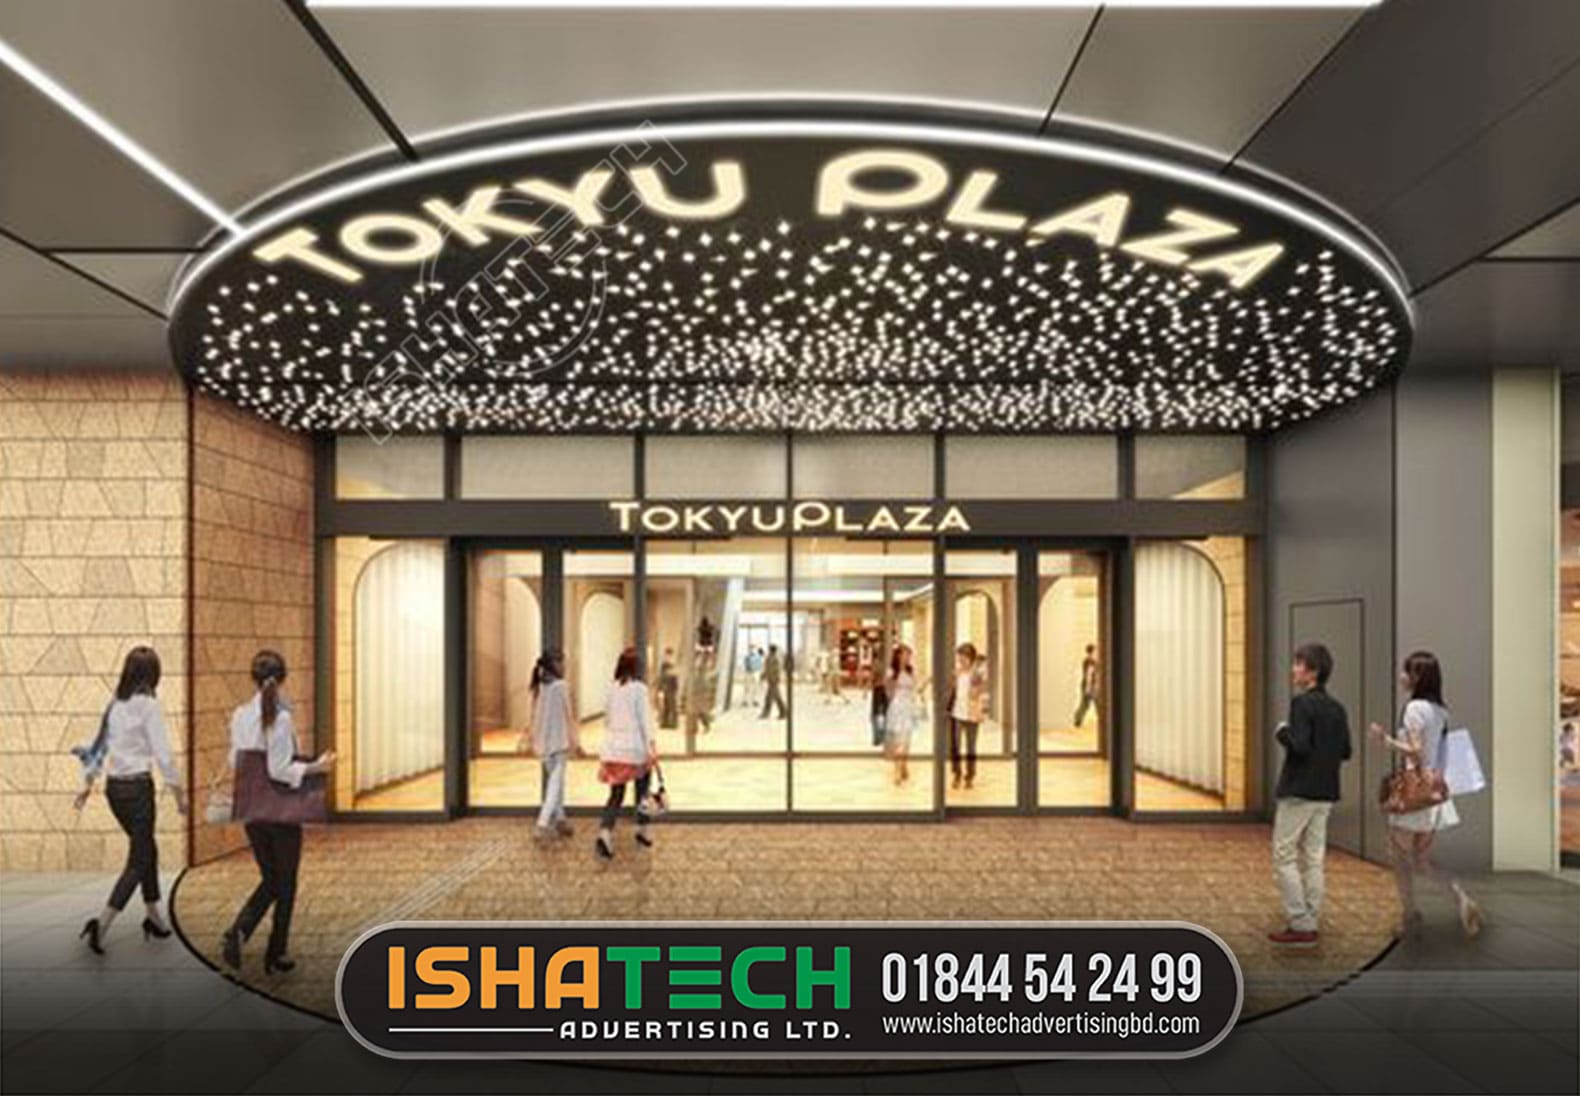 TOKYU PLAZA SIGNBOARD, SHOPPING MALL GATE LED LETTER SIGNAGE BD